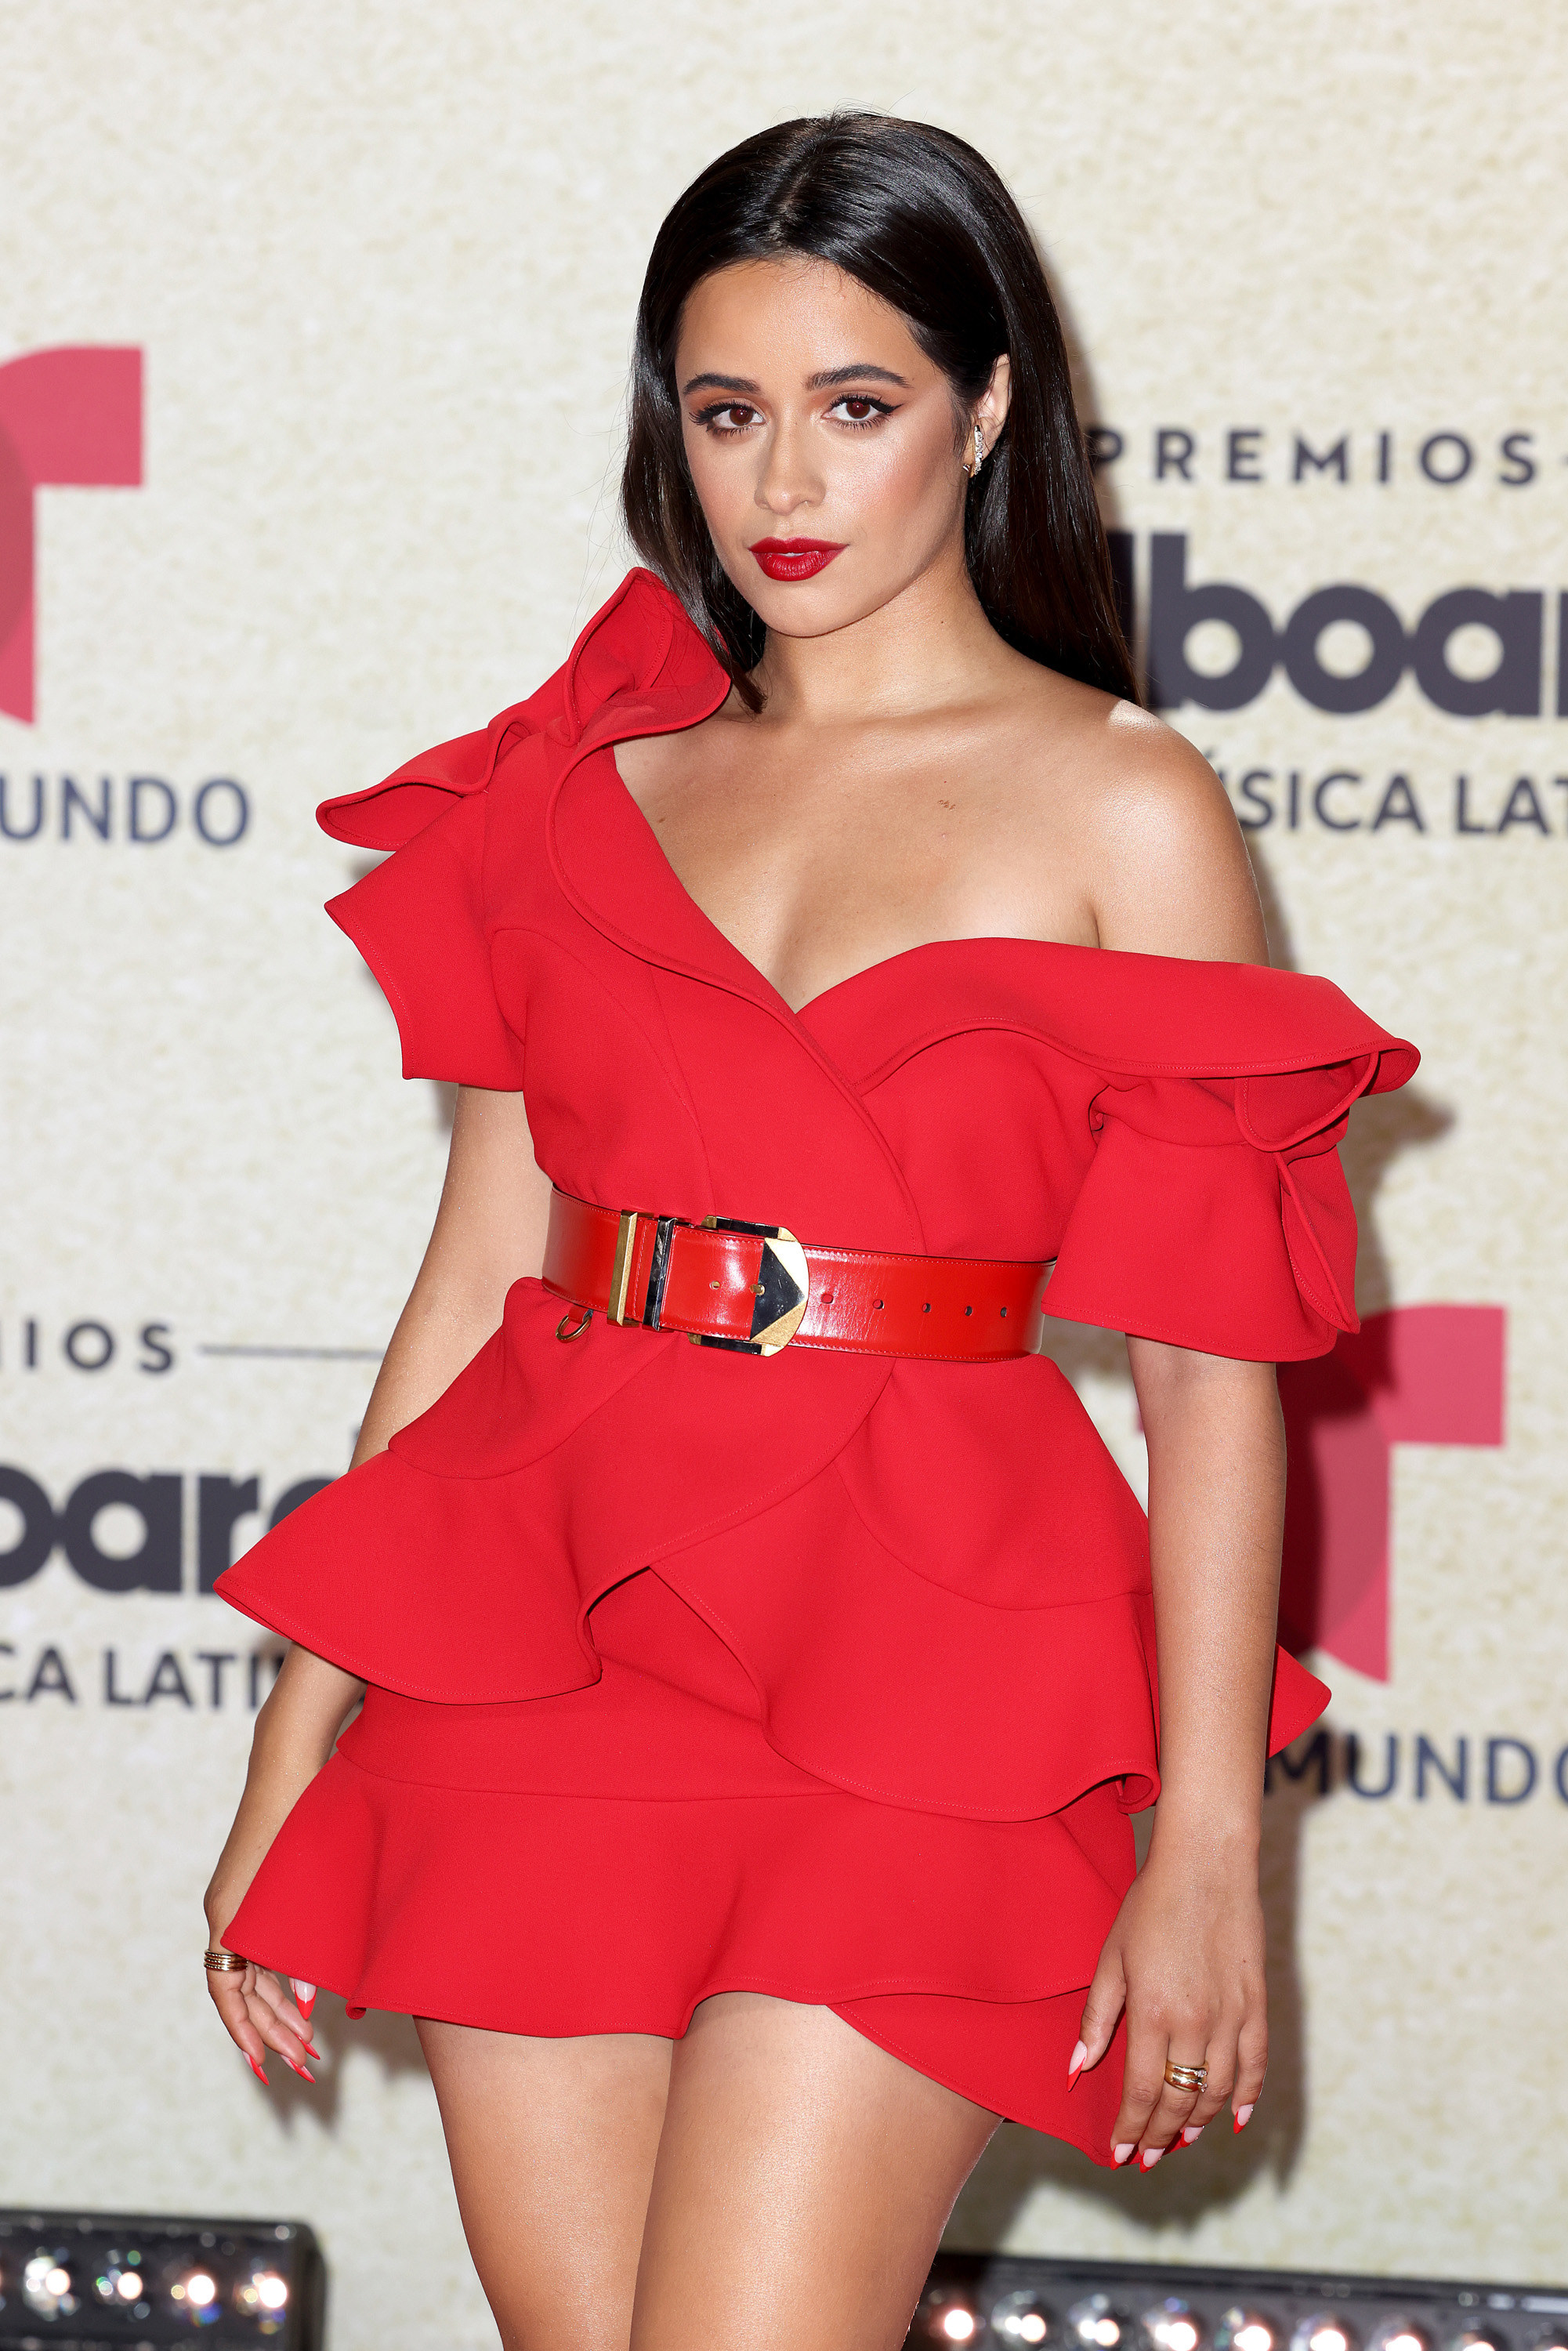 Camila on the red carpet in a bright-colored short, frilly dress with belt